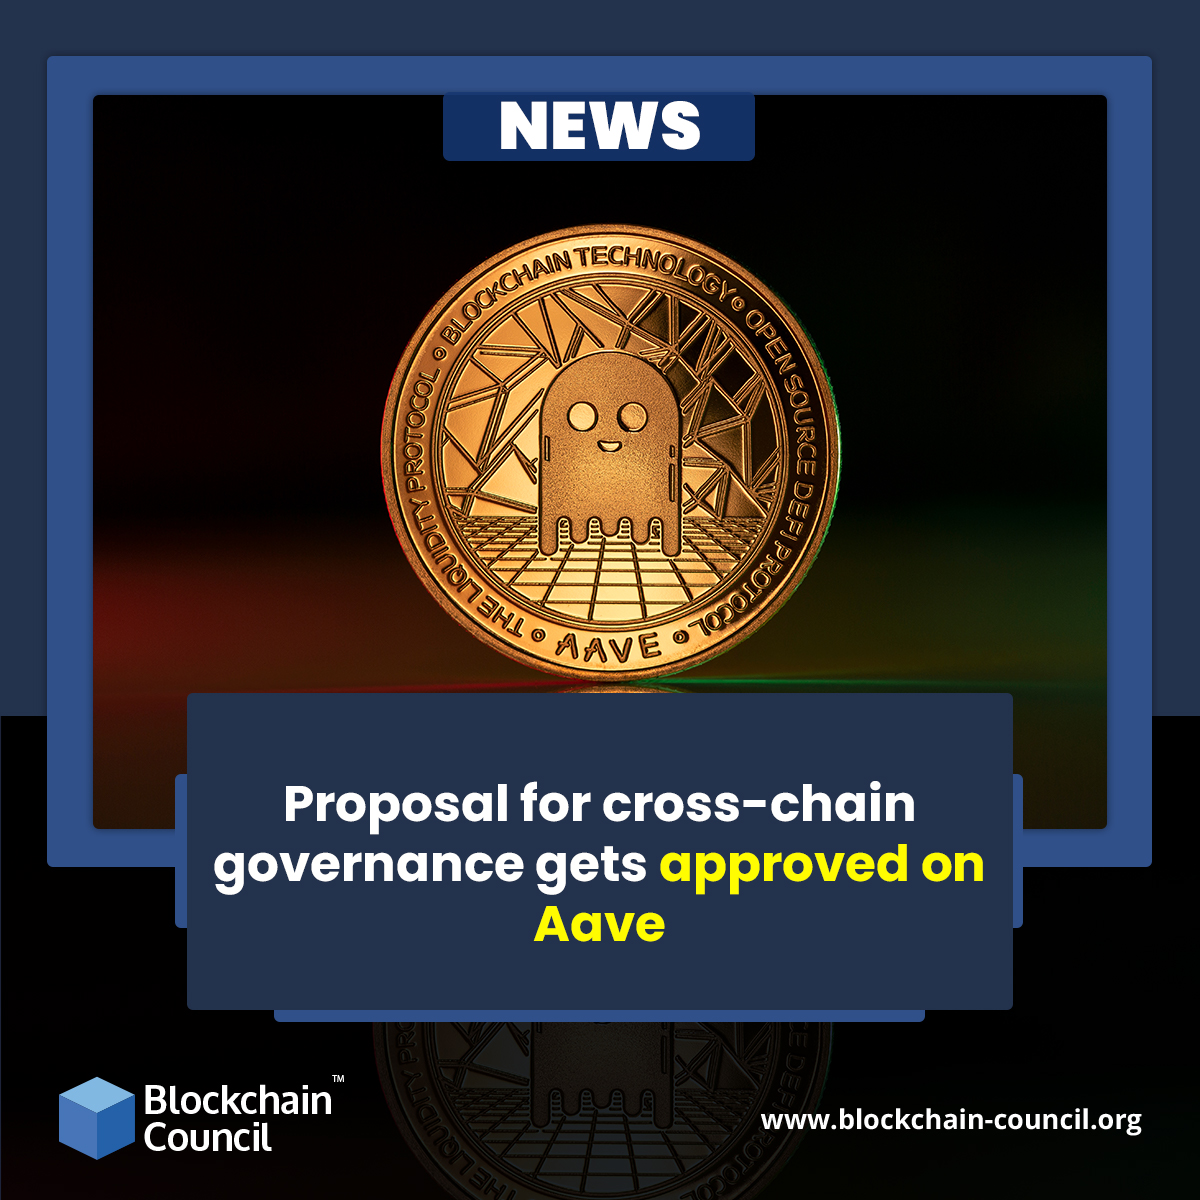 Proposal for cross-chain governance gets approved on Aave